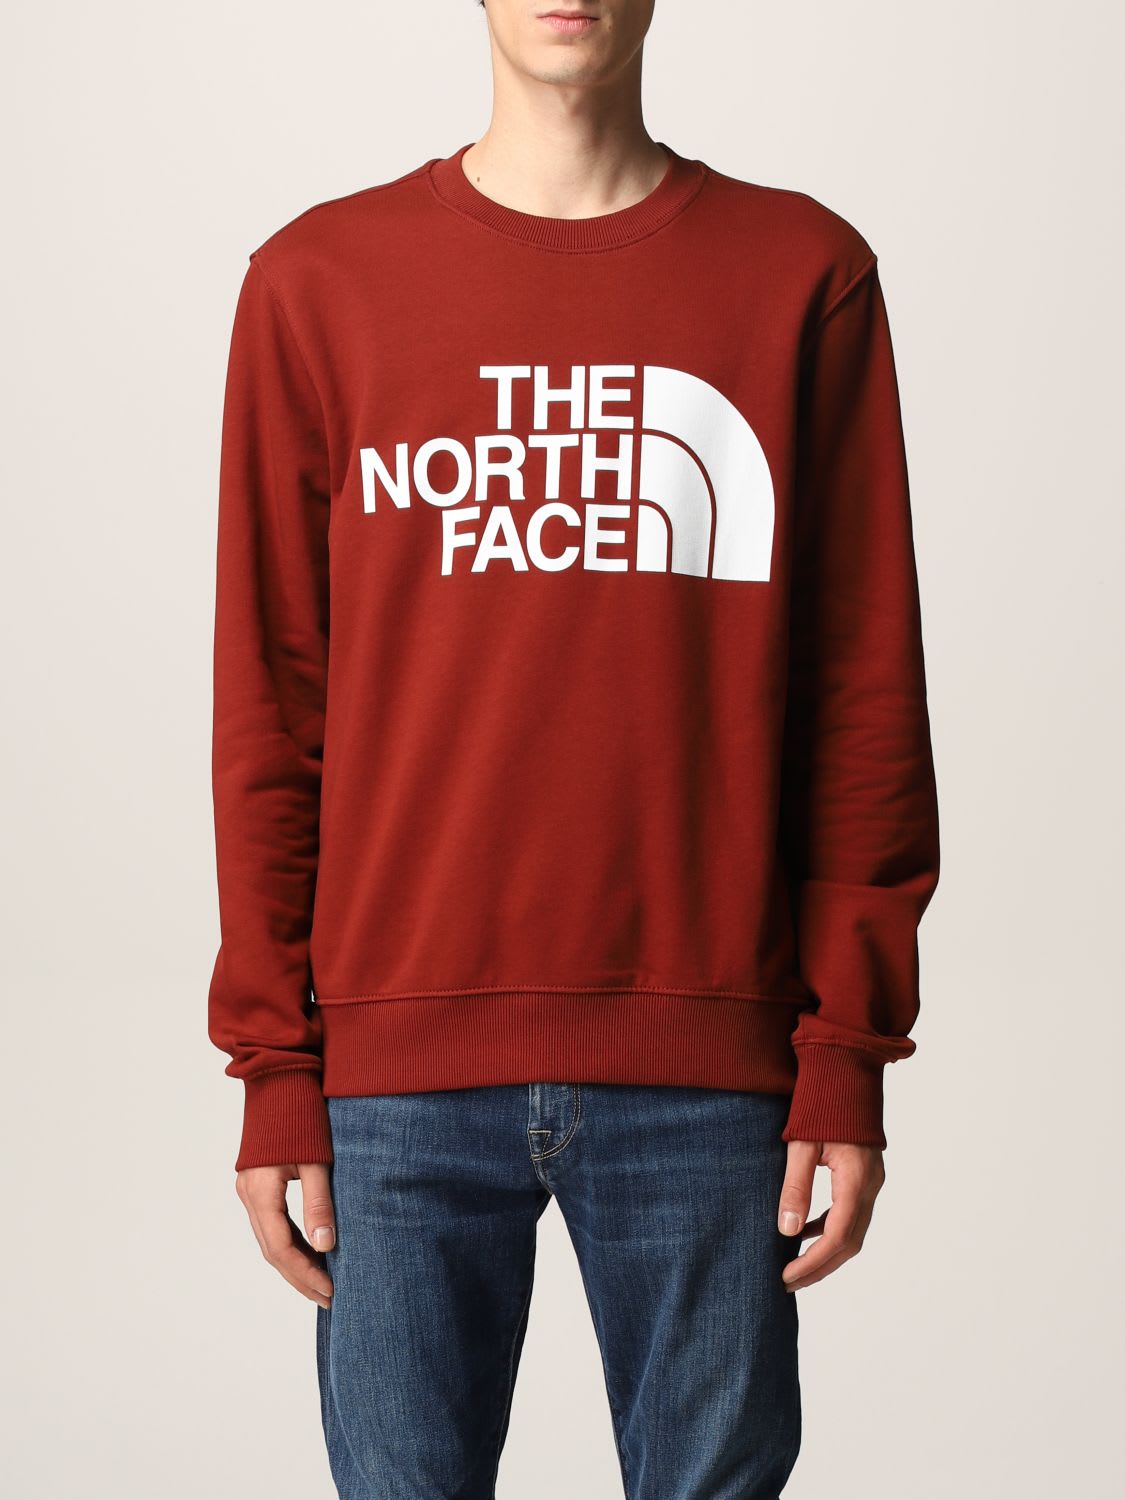 The North Face Sweatshirt T-shirt Men The North Face